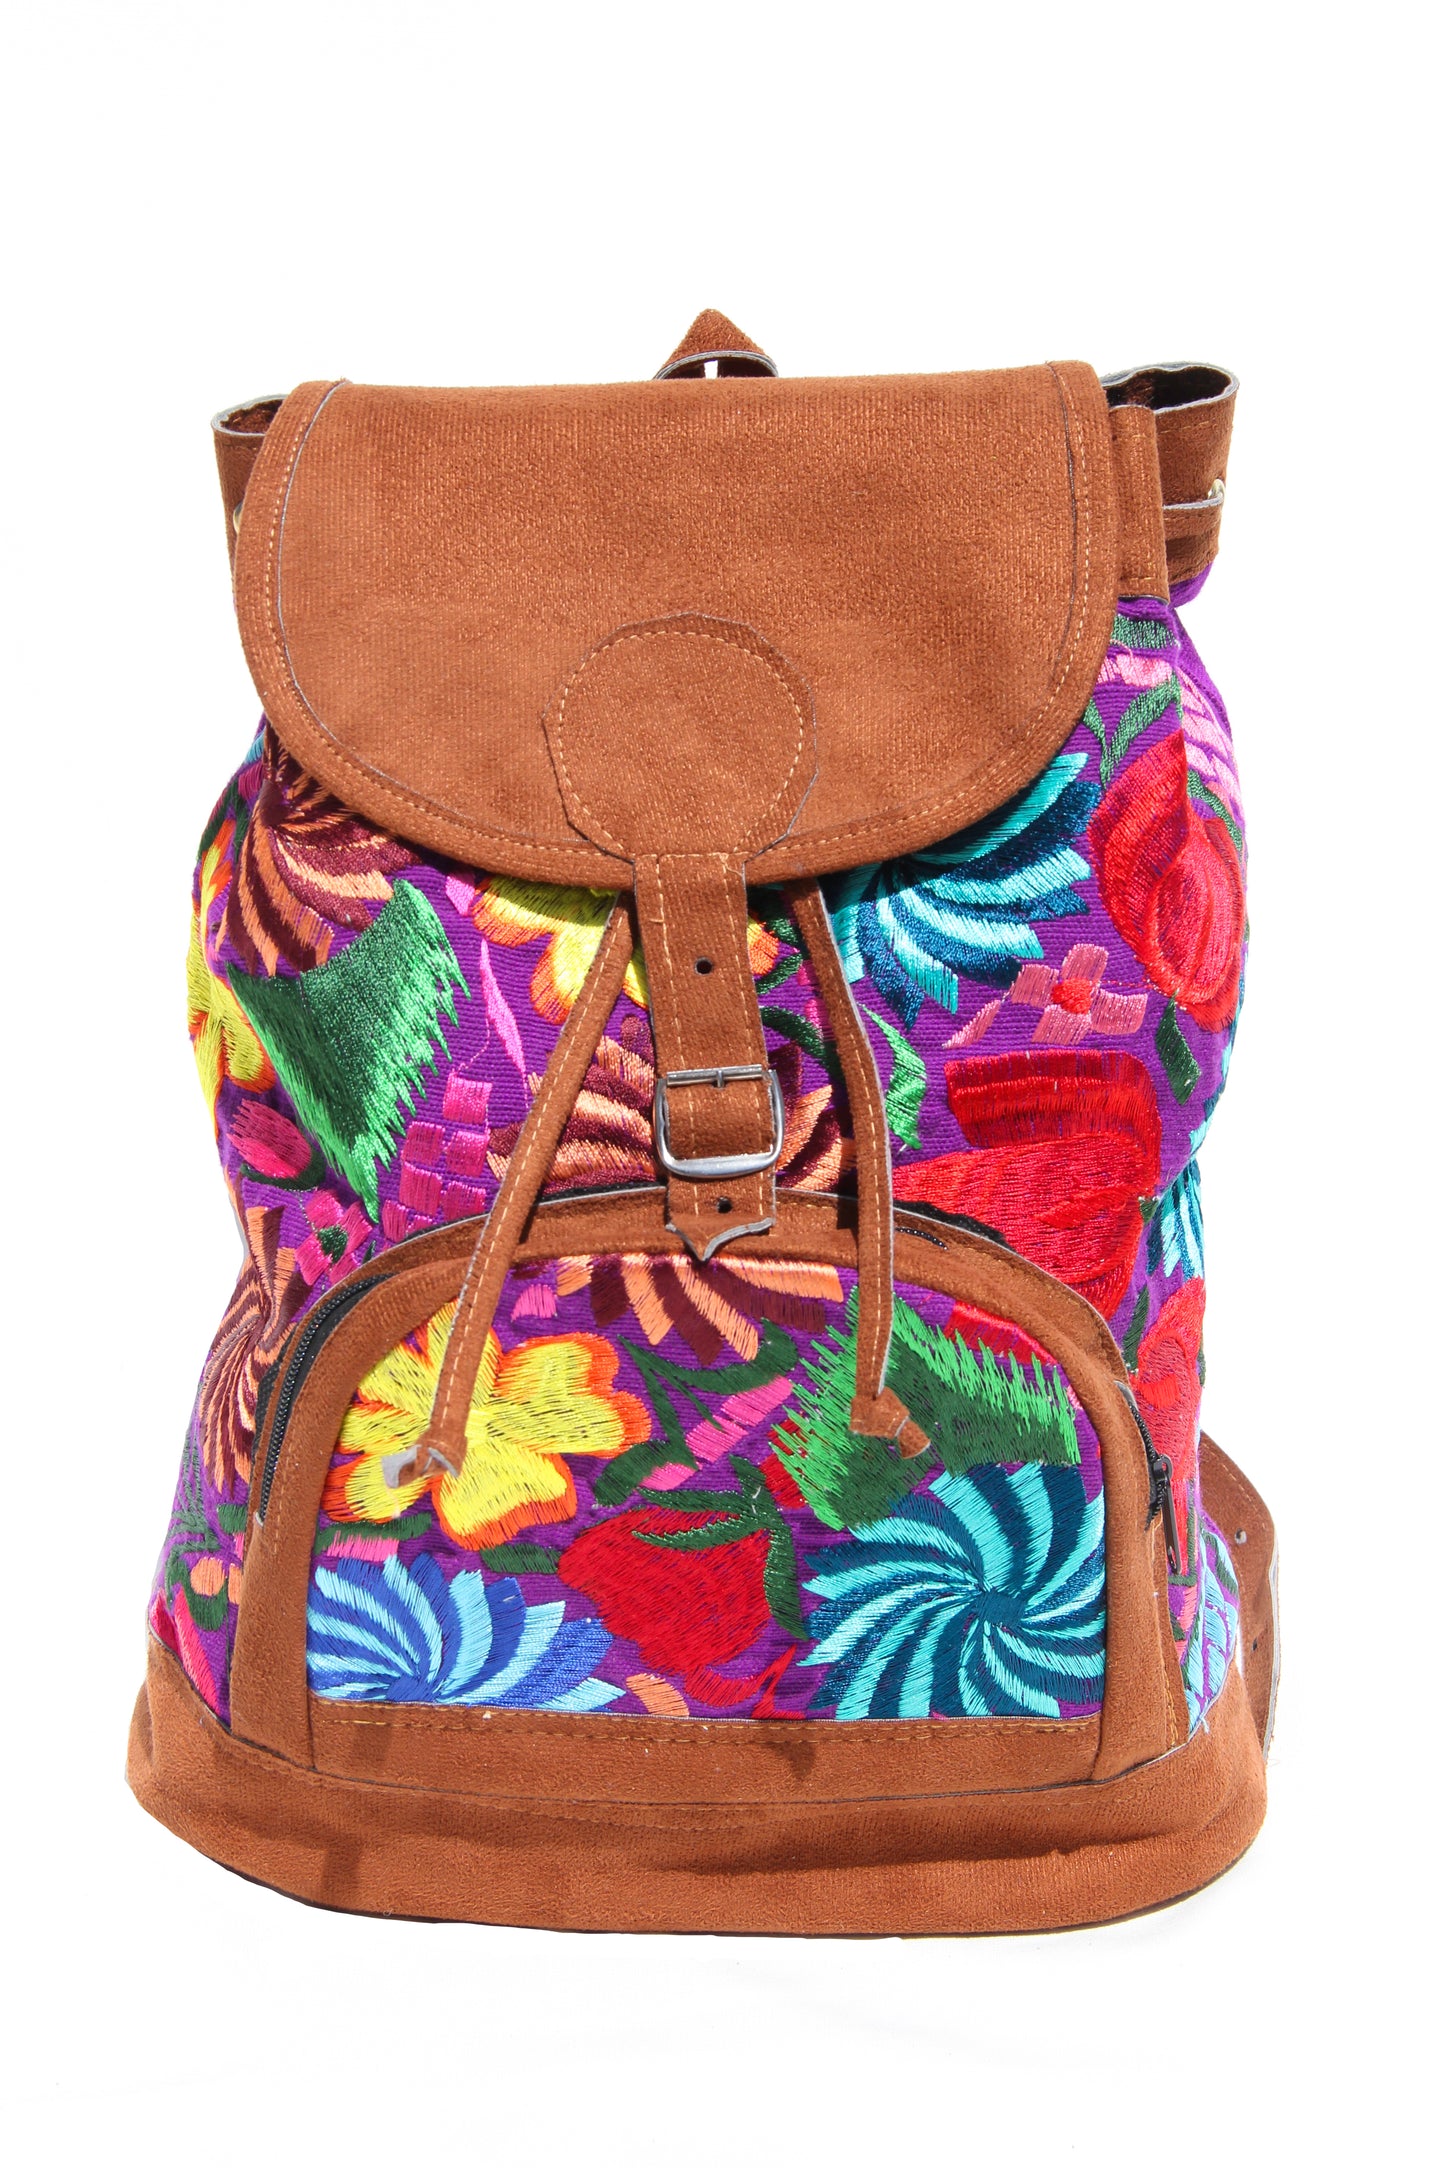 colorful huipil floral embroidery backpack purple woven fabric and faux suede contrast with adjustable straps and front buckle closure with front zipper pocket the prefect travel, hiking or beach bag unique bag great for back to school take this bag on your next destination boho bag and hippie style bag a great standout accessories made in Guatemala